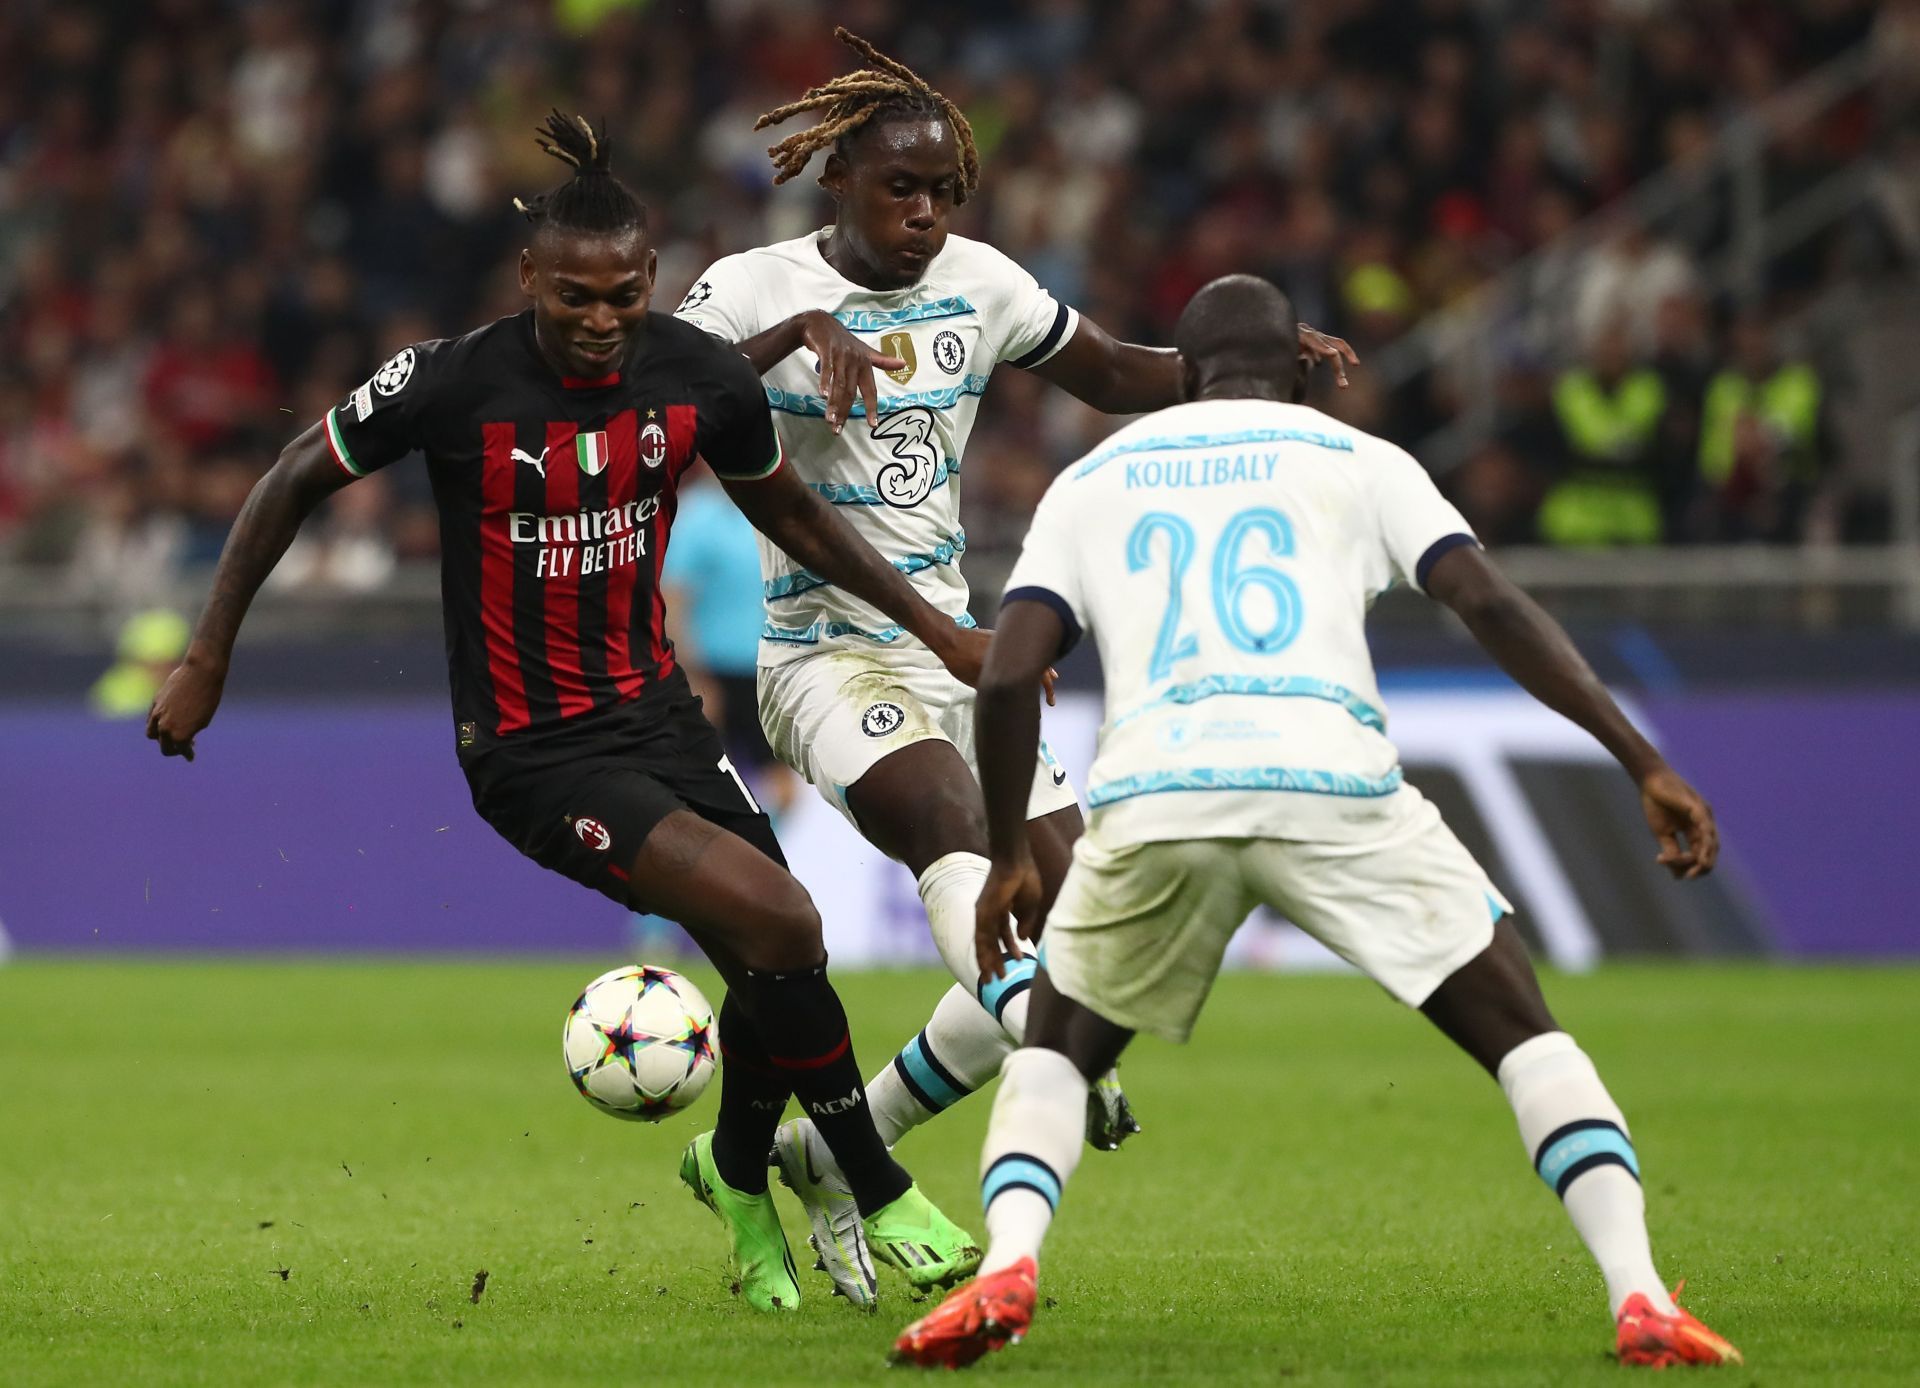 Chalobah against AC Milan in the UEFA Champions League